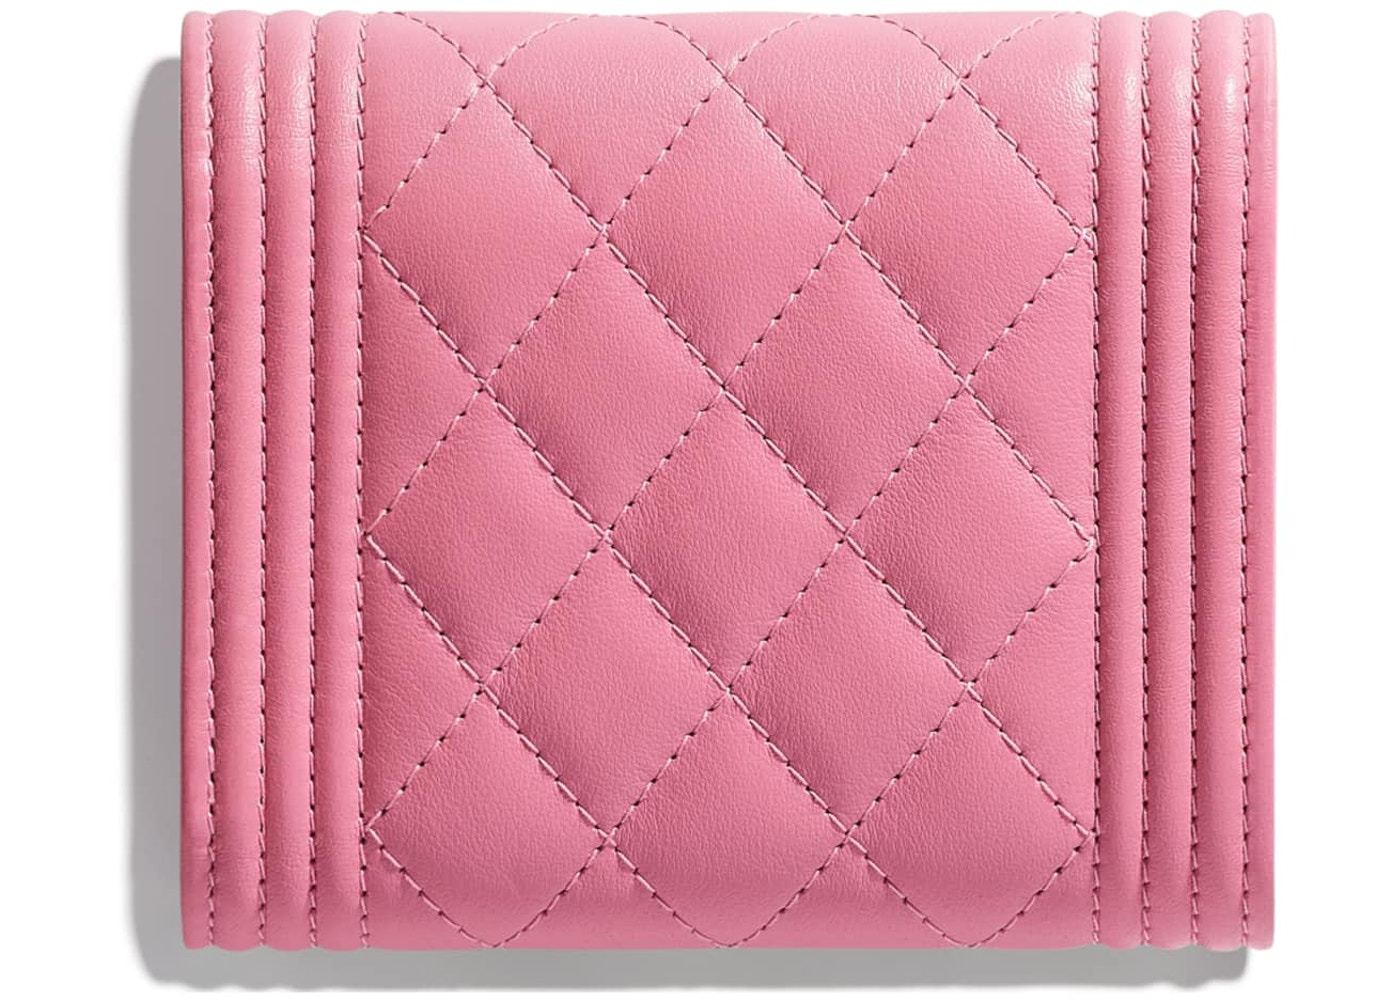 Chanel Boy Square Clutch With Chain – CWC Grained Calfskin Pink